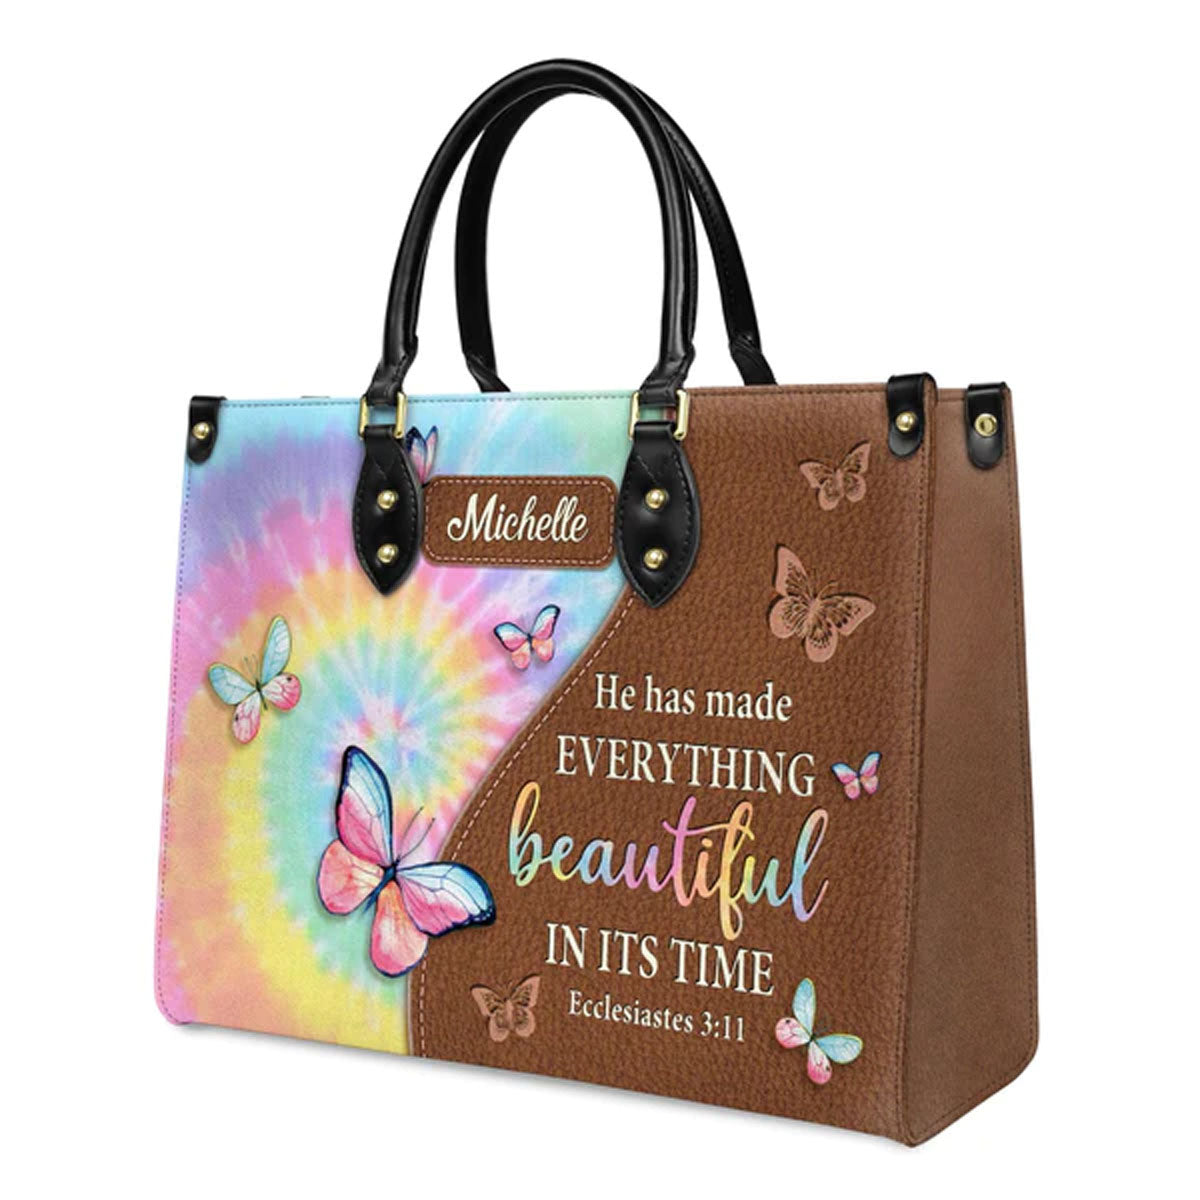 Christianartbag Handbags, He Has Made Everything Beautiful In Its Time Ecclesiastes 3:11 Leather Bags, Personalized Bags, Gifts for Women, Christmas Gift, CABLTB02140823. - Christian Art Bag